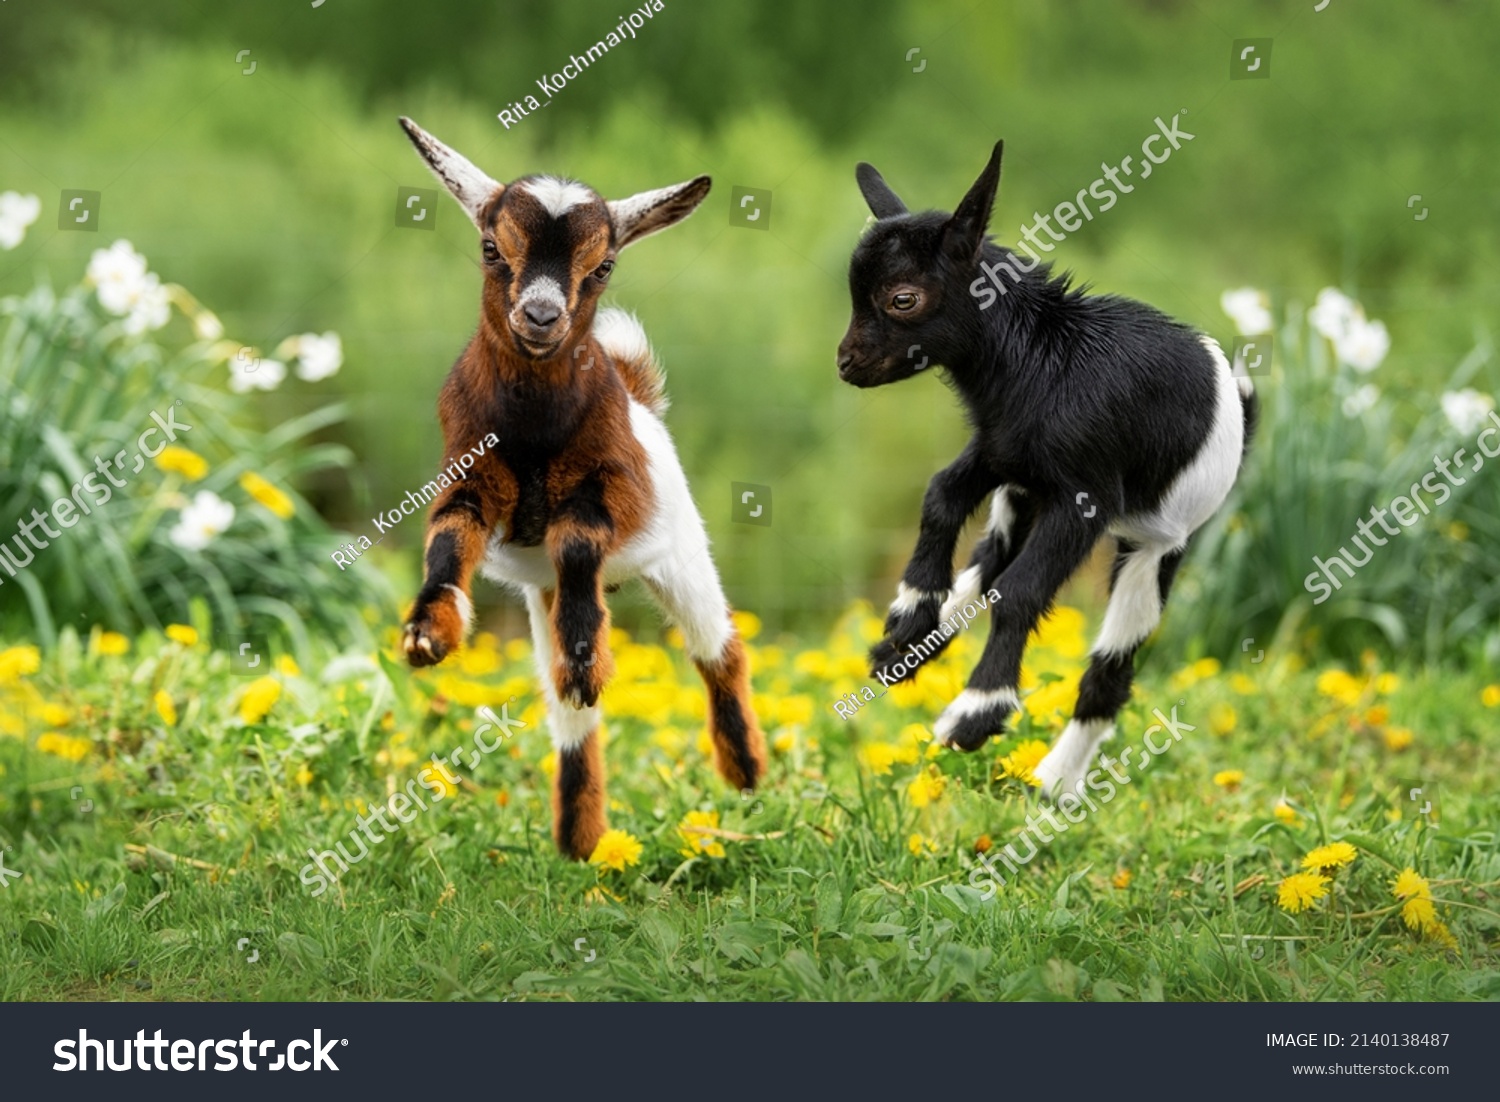 Two little funny baby goats playing in the field with flowers. Farm animals. #2140138487